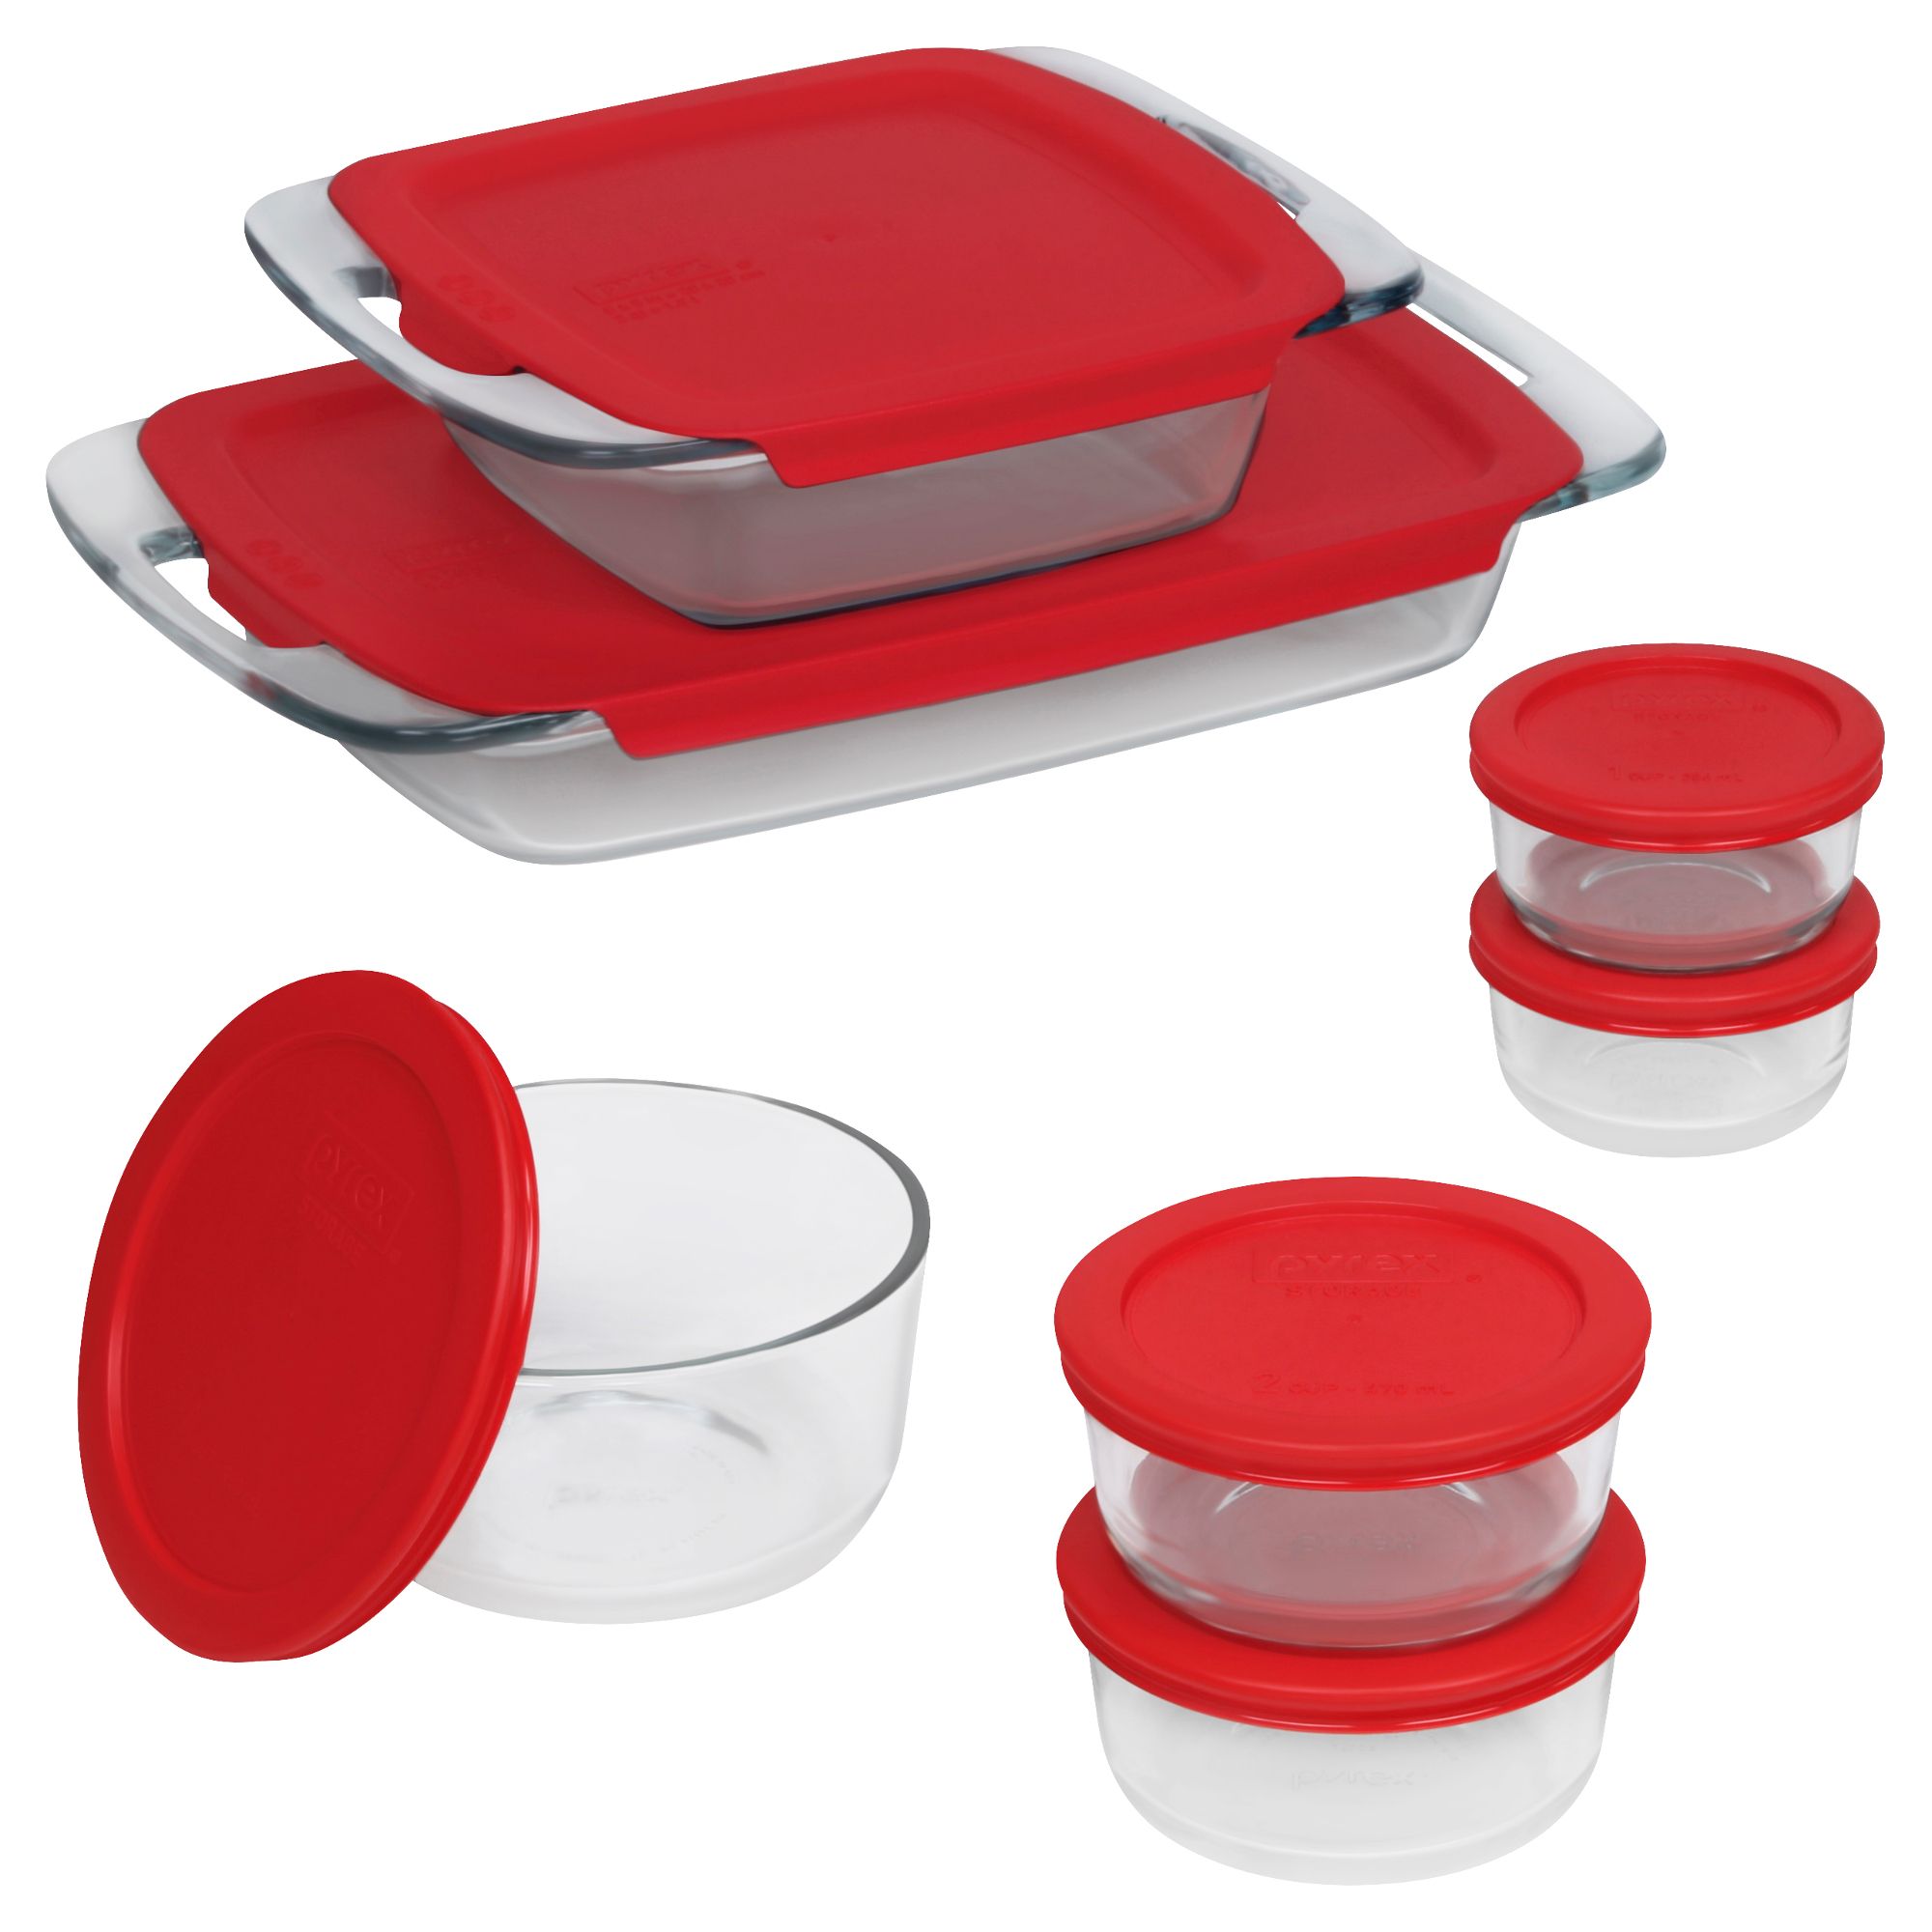 Pyrex Bake And Store Set, 14Pc